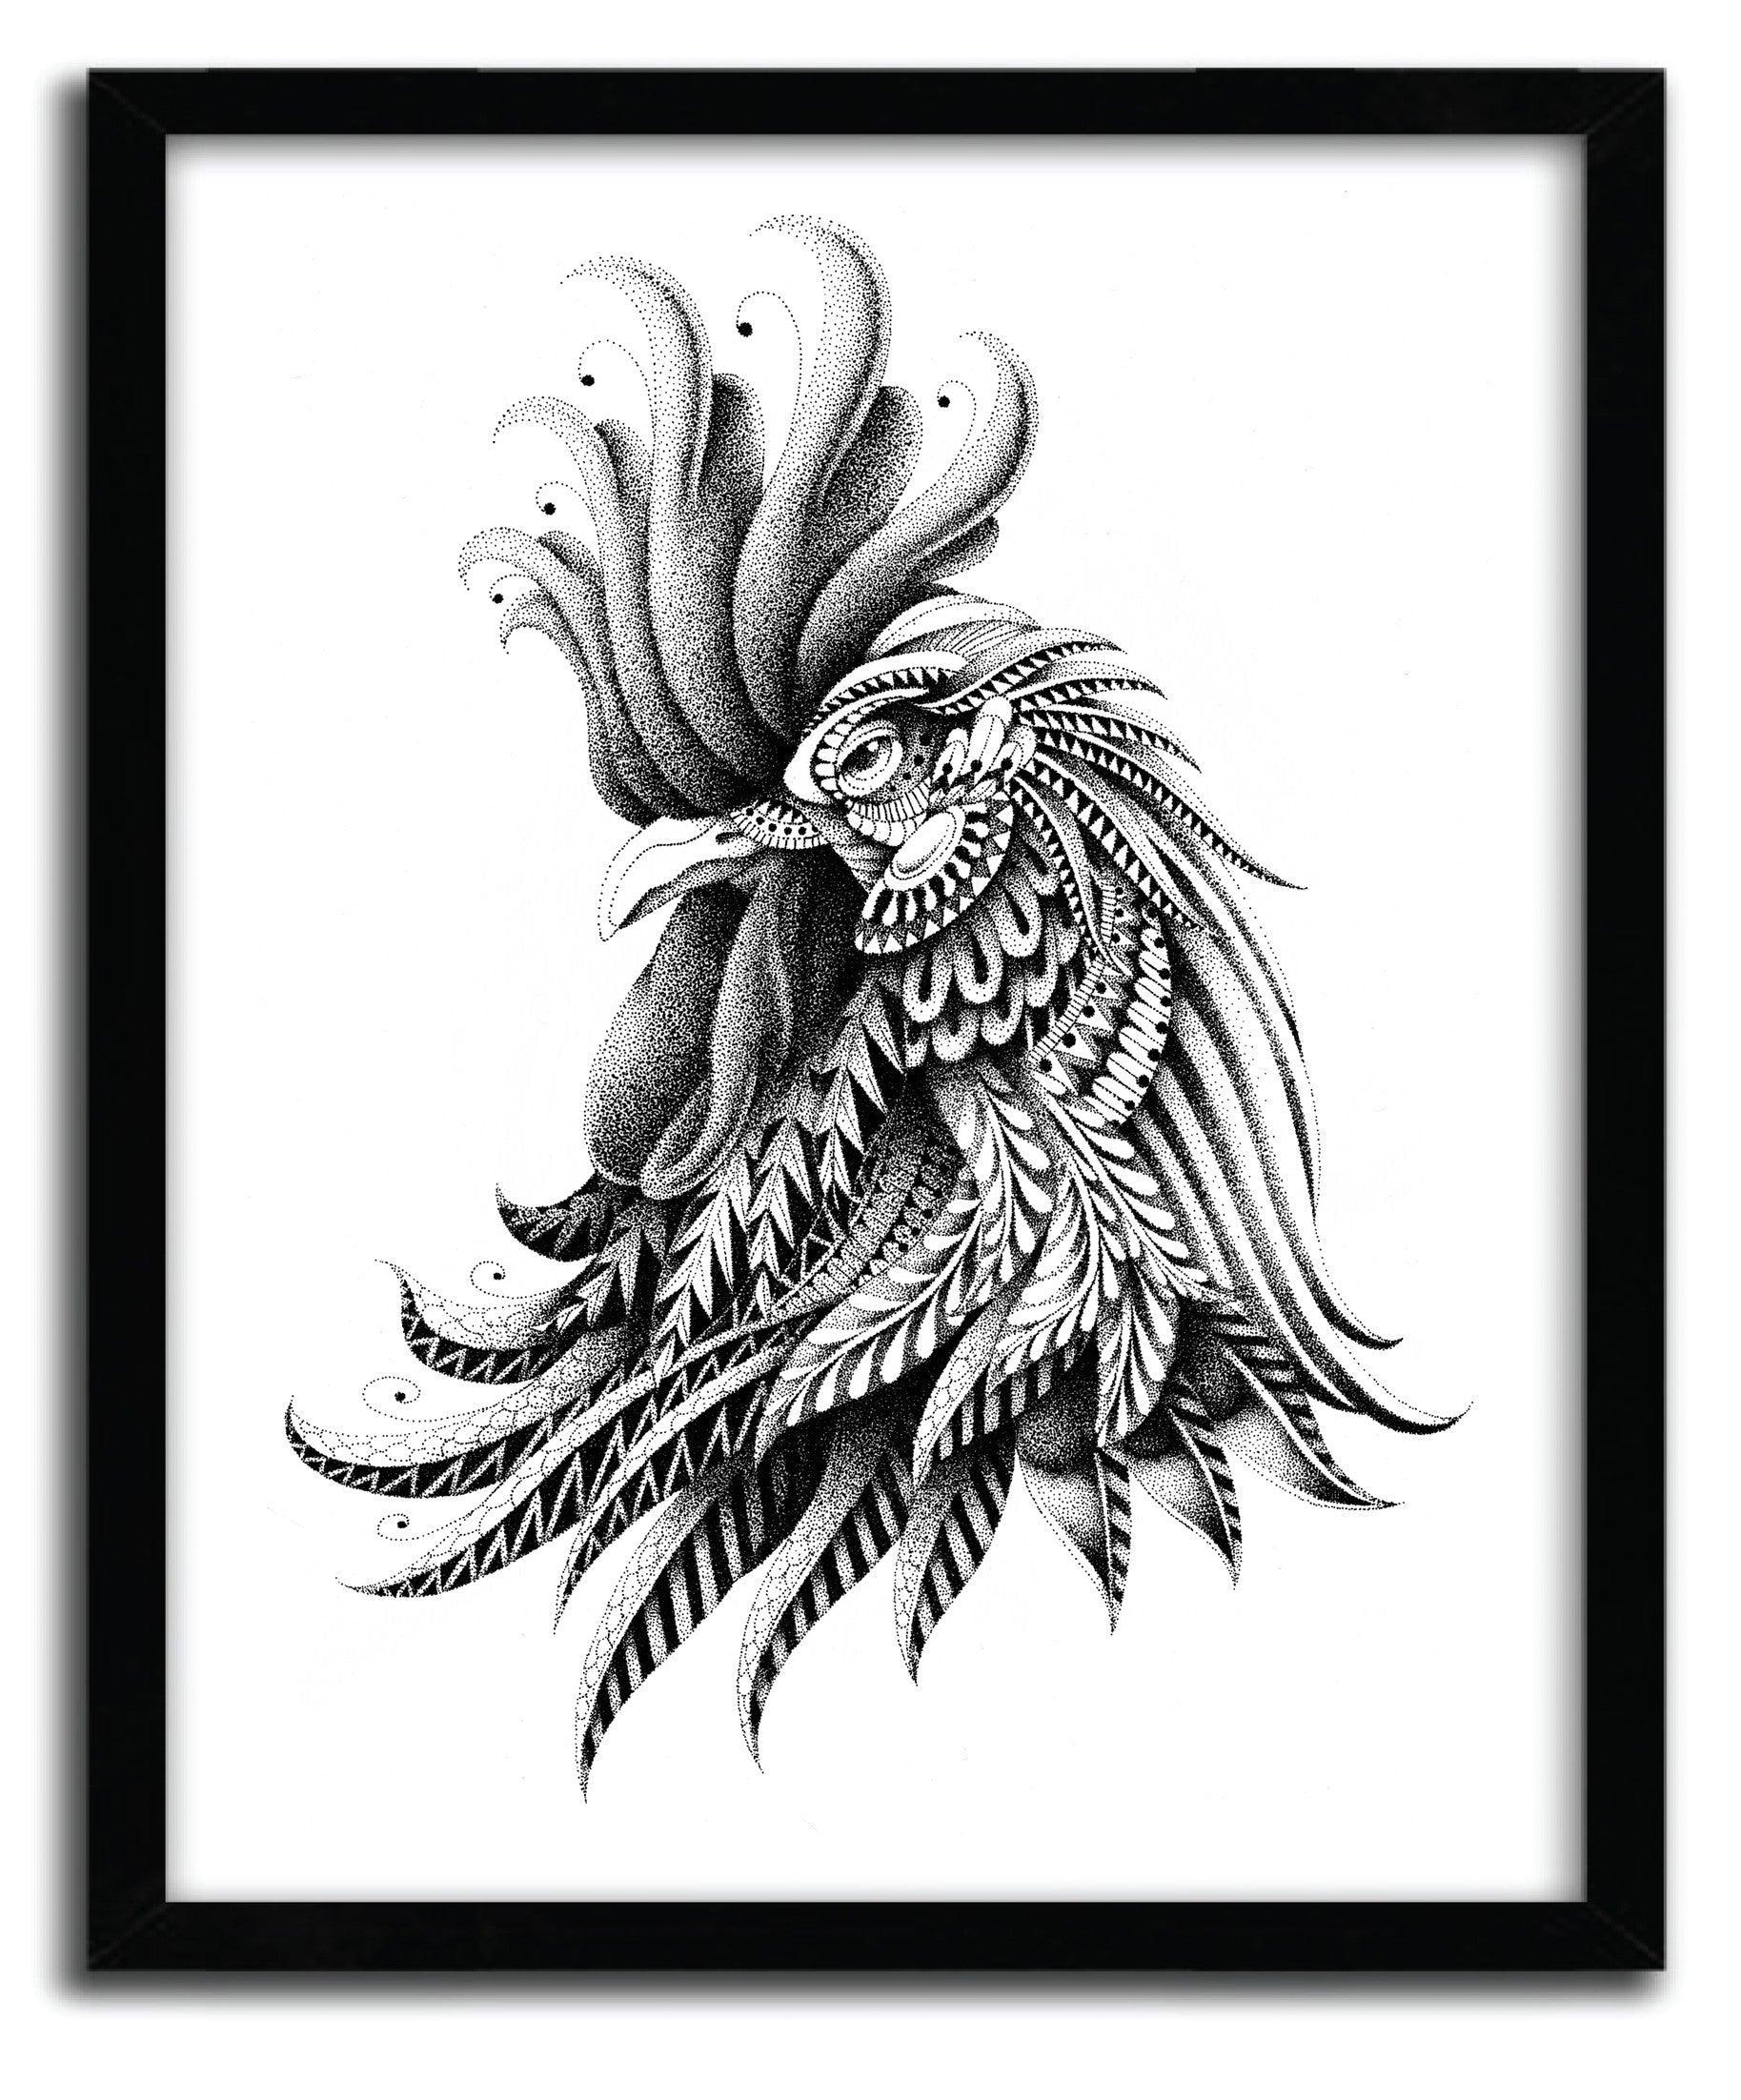 Affiche ORNATE ROOSTER BY BIOWORKZ ArtAndToys